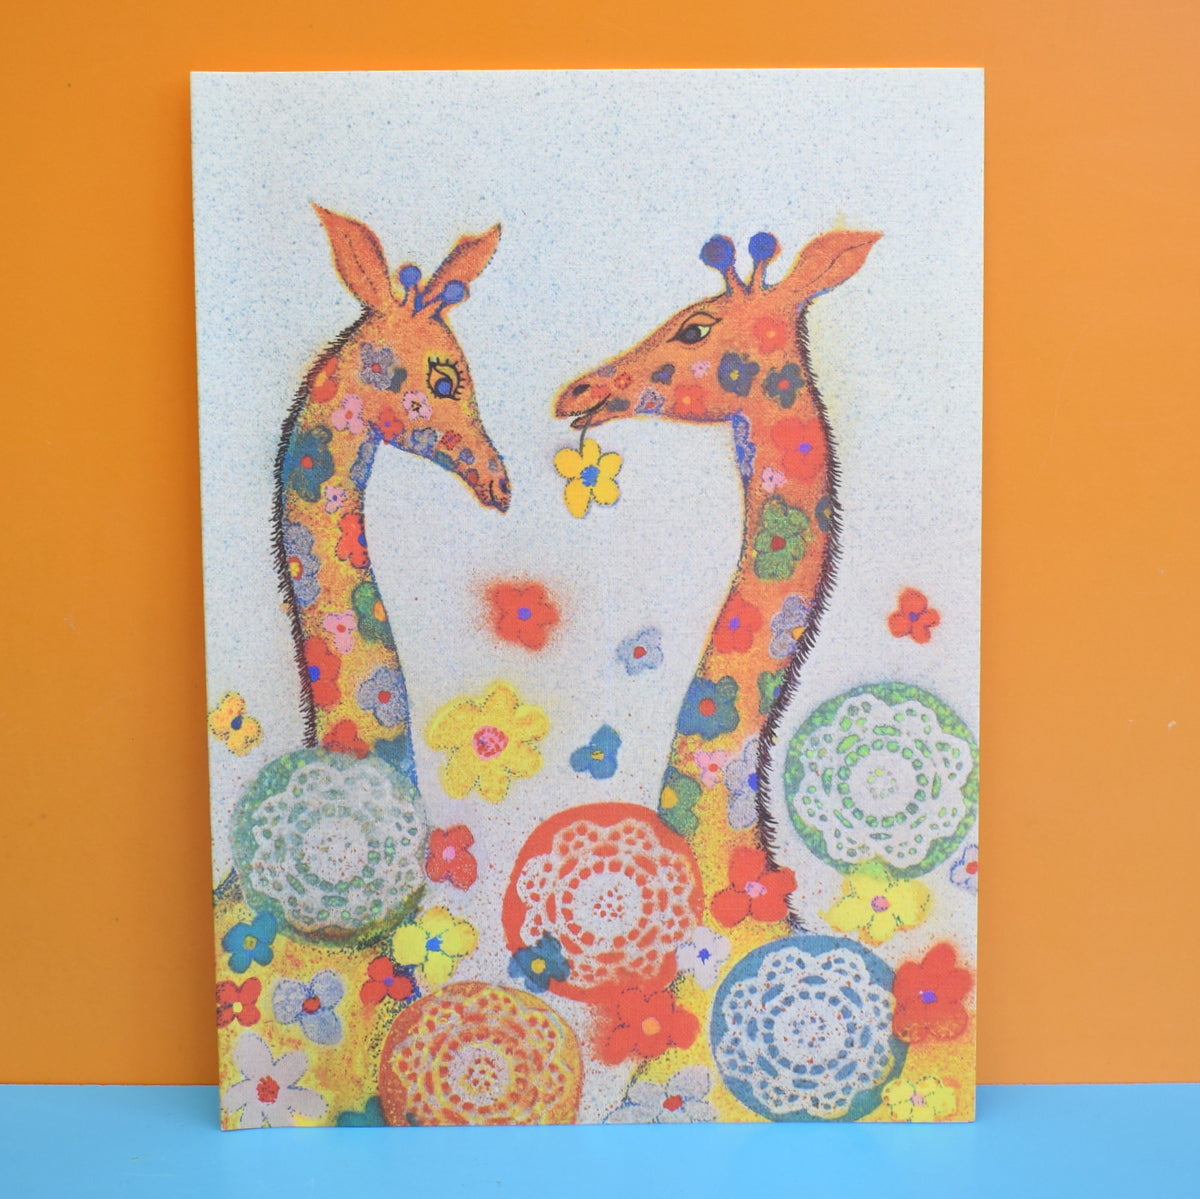 Vintage 1970s Large Greeting Card - by Andy Gage - Floral Giraffes